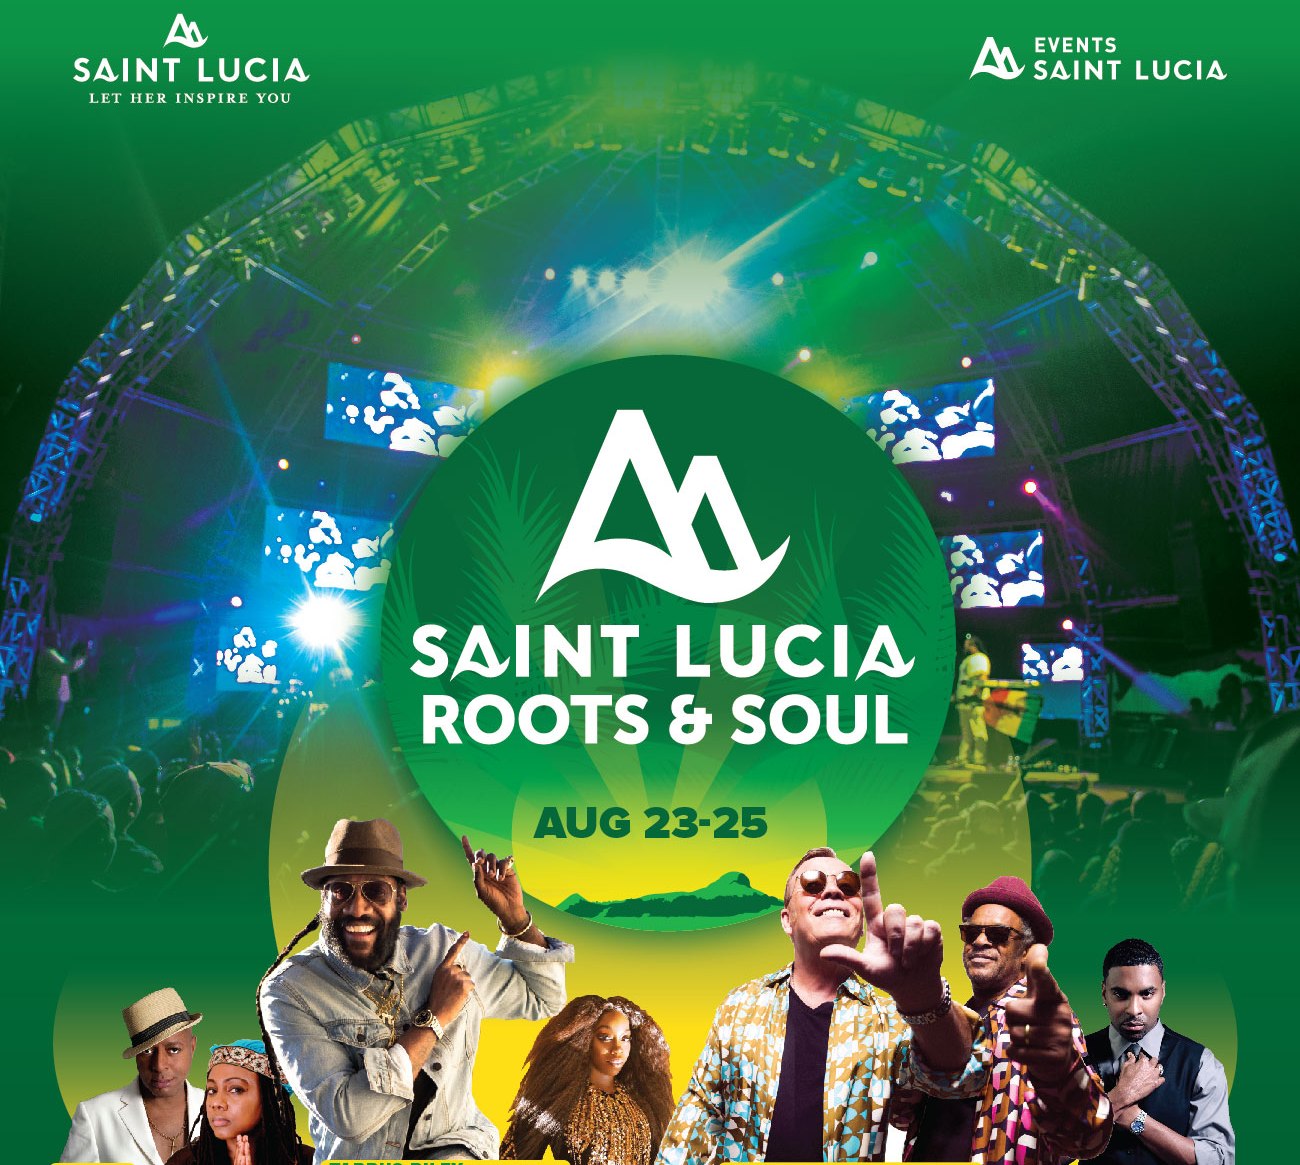 Expanded lineup set for third Annual Saint Lucia Roots & Soul